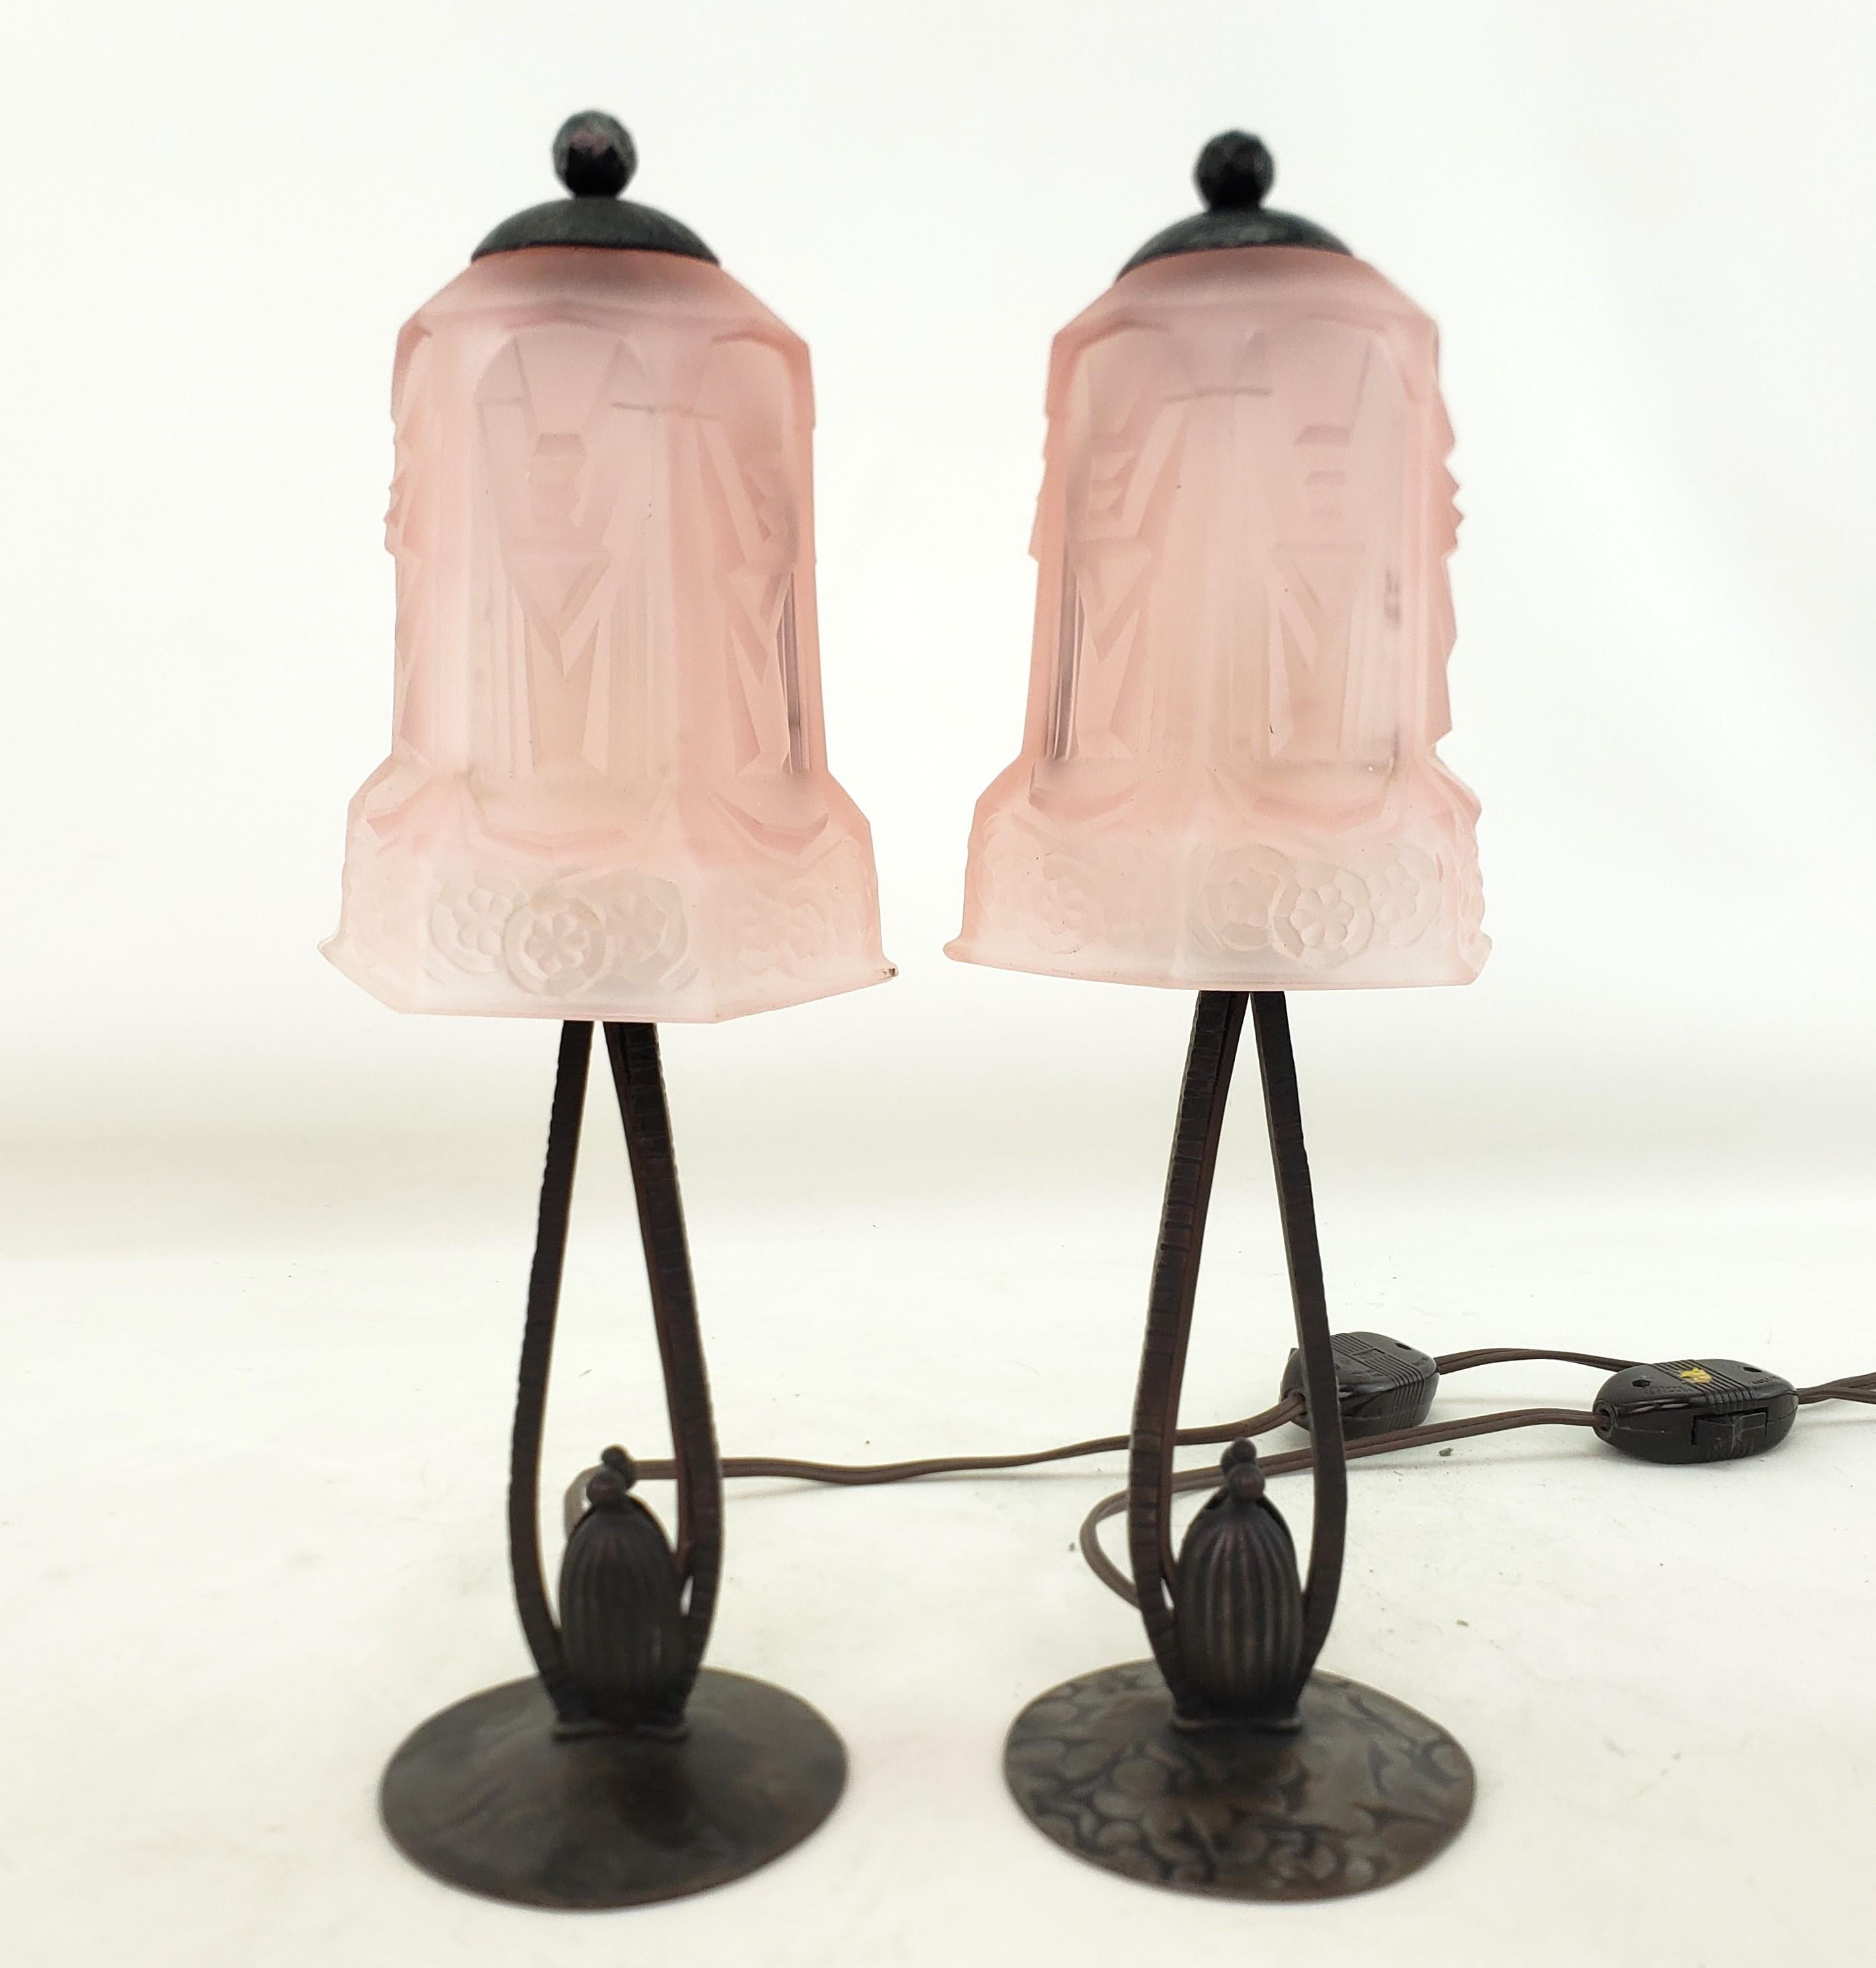 French Pair of Antique Art Deco Bourdoir or Table Lamps with Frosted Pink Glass Shades For Sale